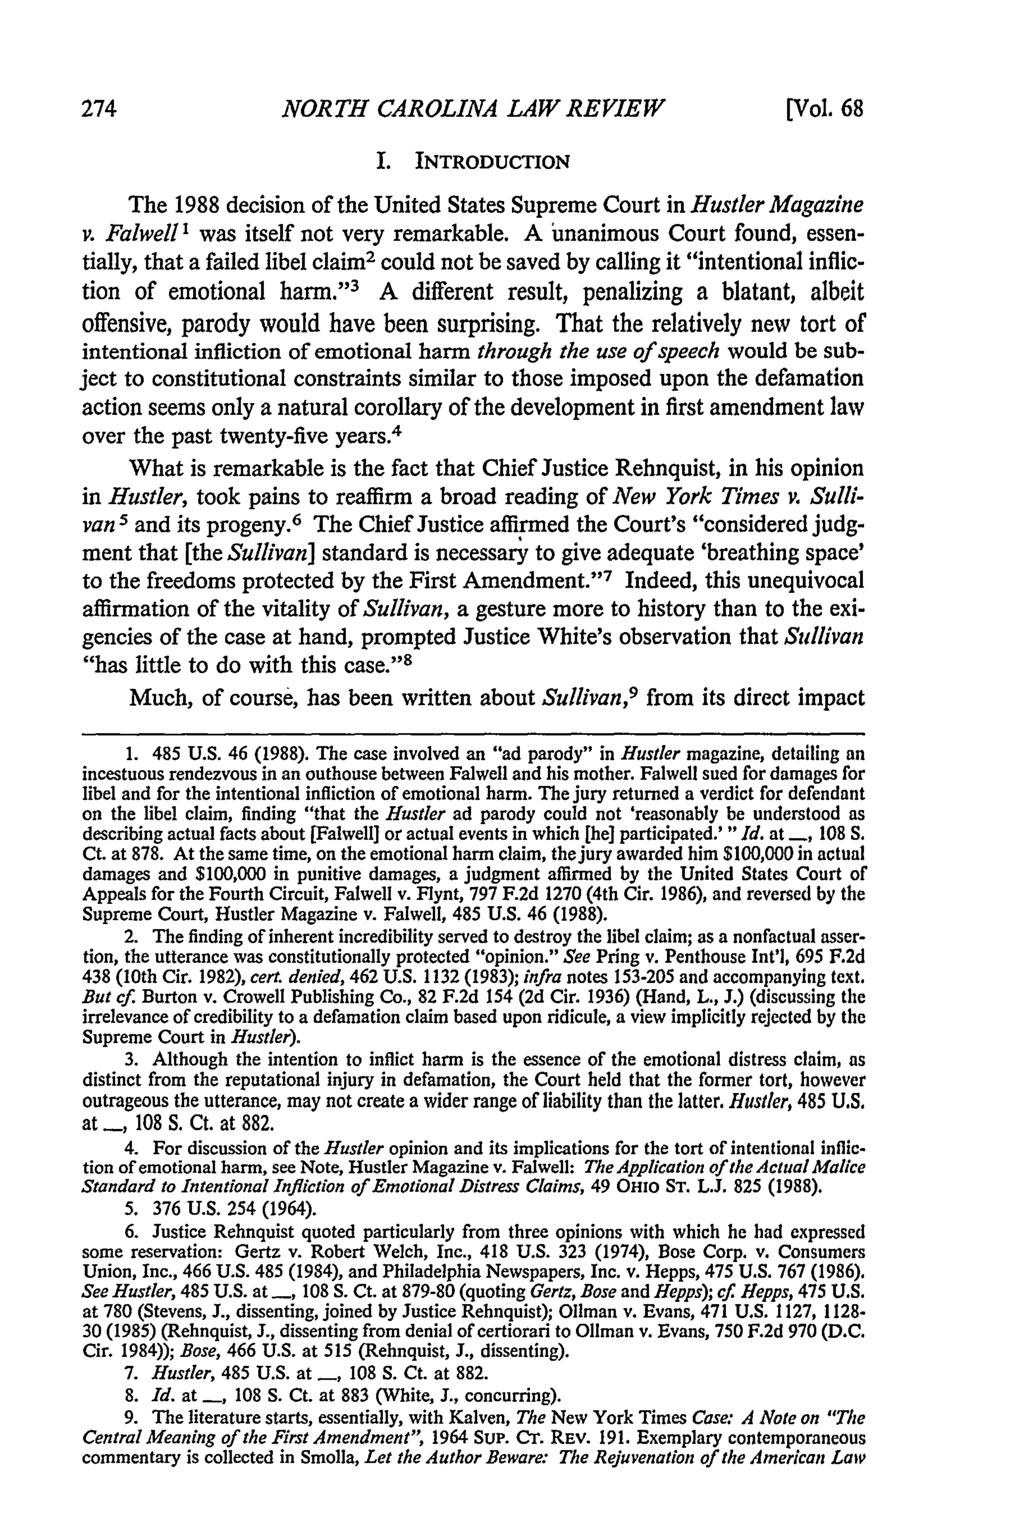 NORTH CAROLINA LAW REVIEW [Vol. 68 I. INTRODUCTION The 1988 decision of the United States Supreme Court in Hustler Magazine v. Falwell I was itself not very remarkable.